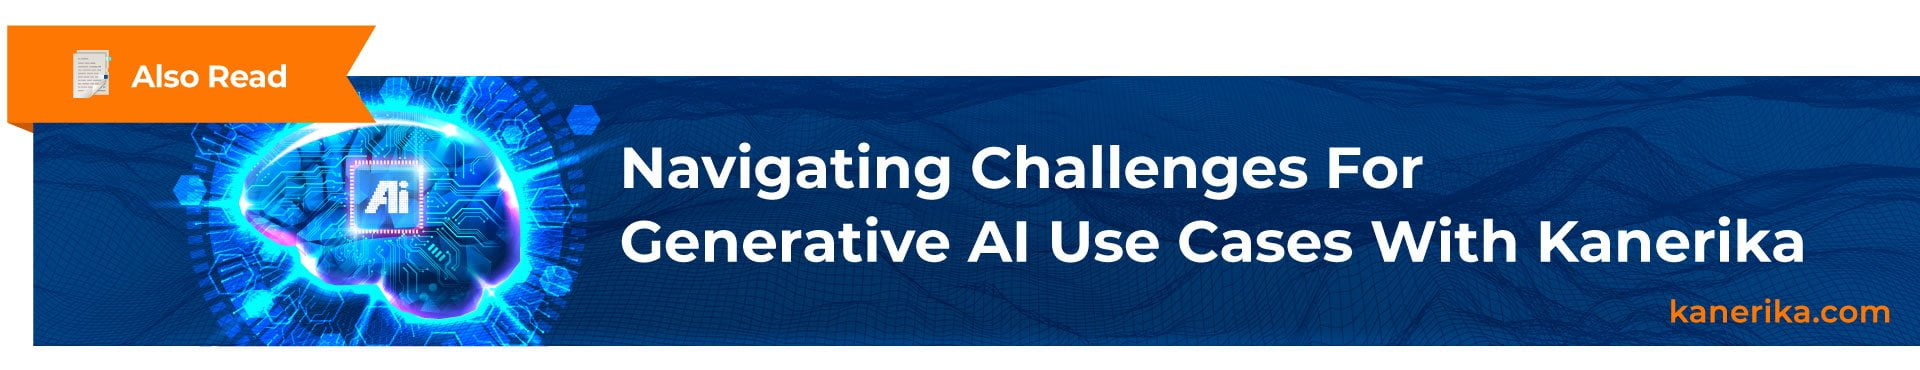 Also read: Navigating Challenges For Generative AI Use Cases With Kanerika